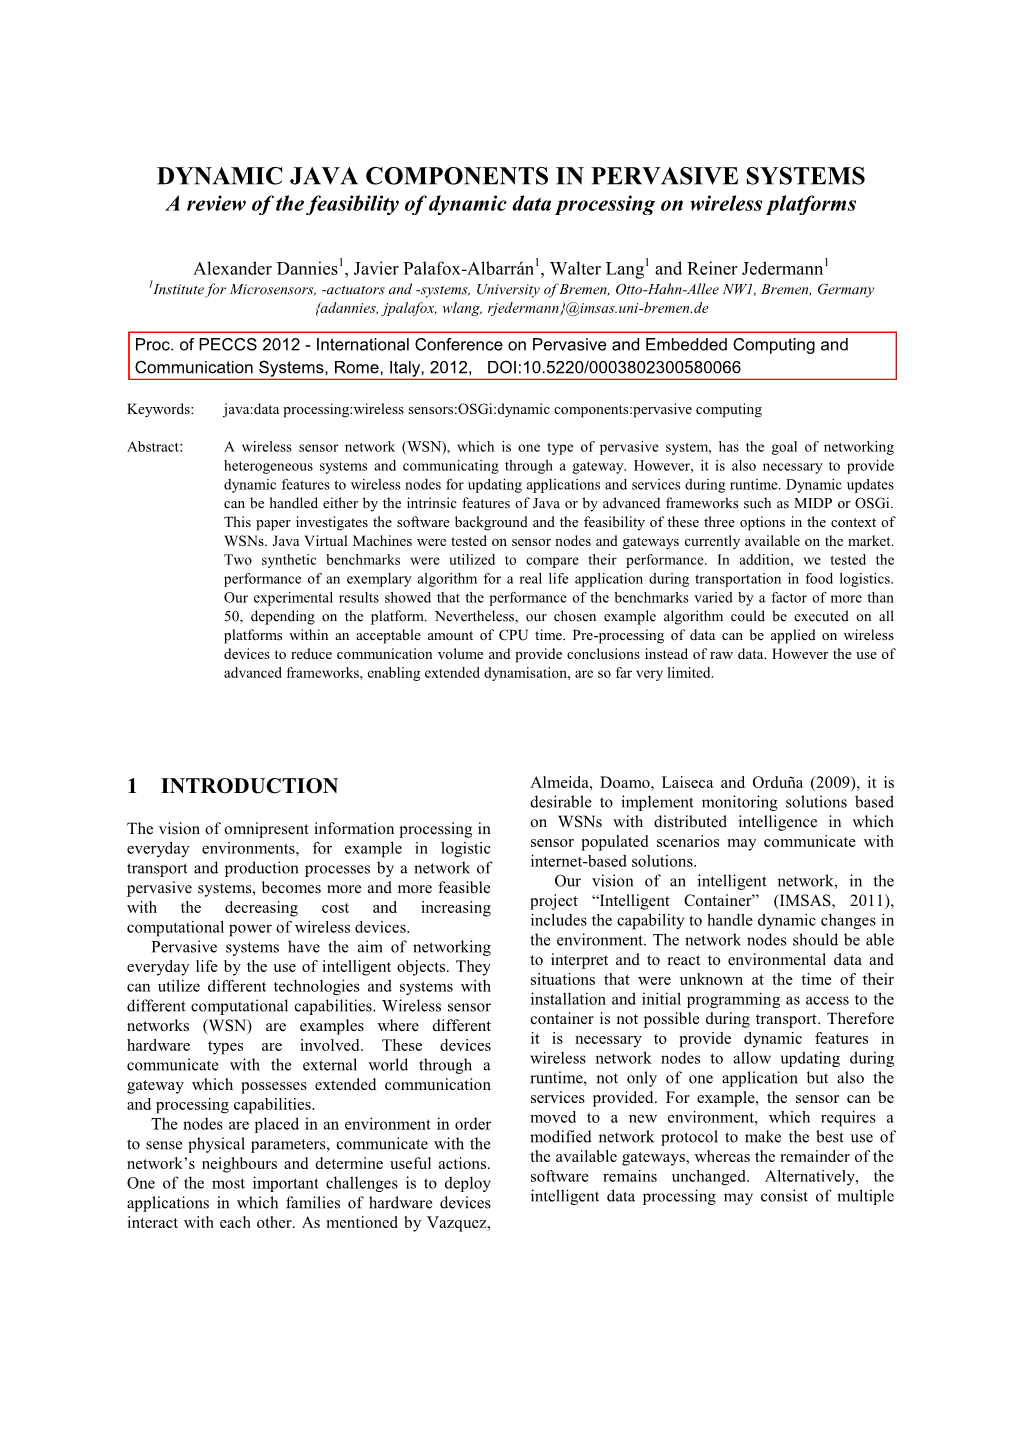 DYNAMIC JAVA COMPONENTS in PERVASIVE SYSTEMS a Review of the Feasibility of Dynamic Data Processing on Wireless Platforms